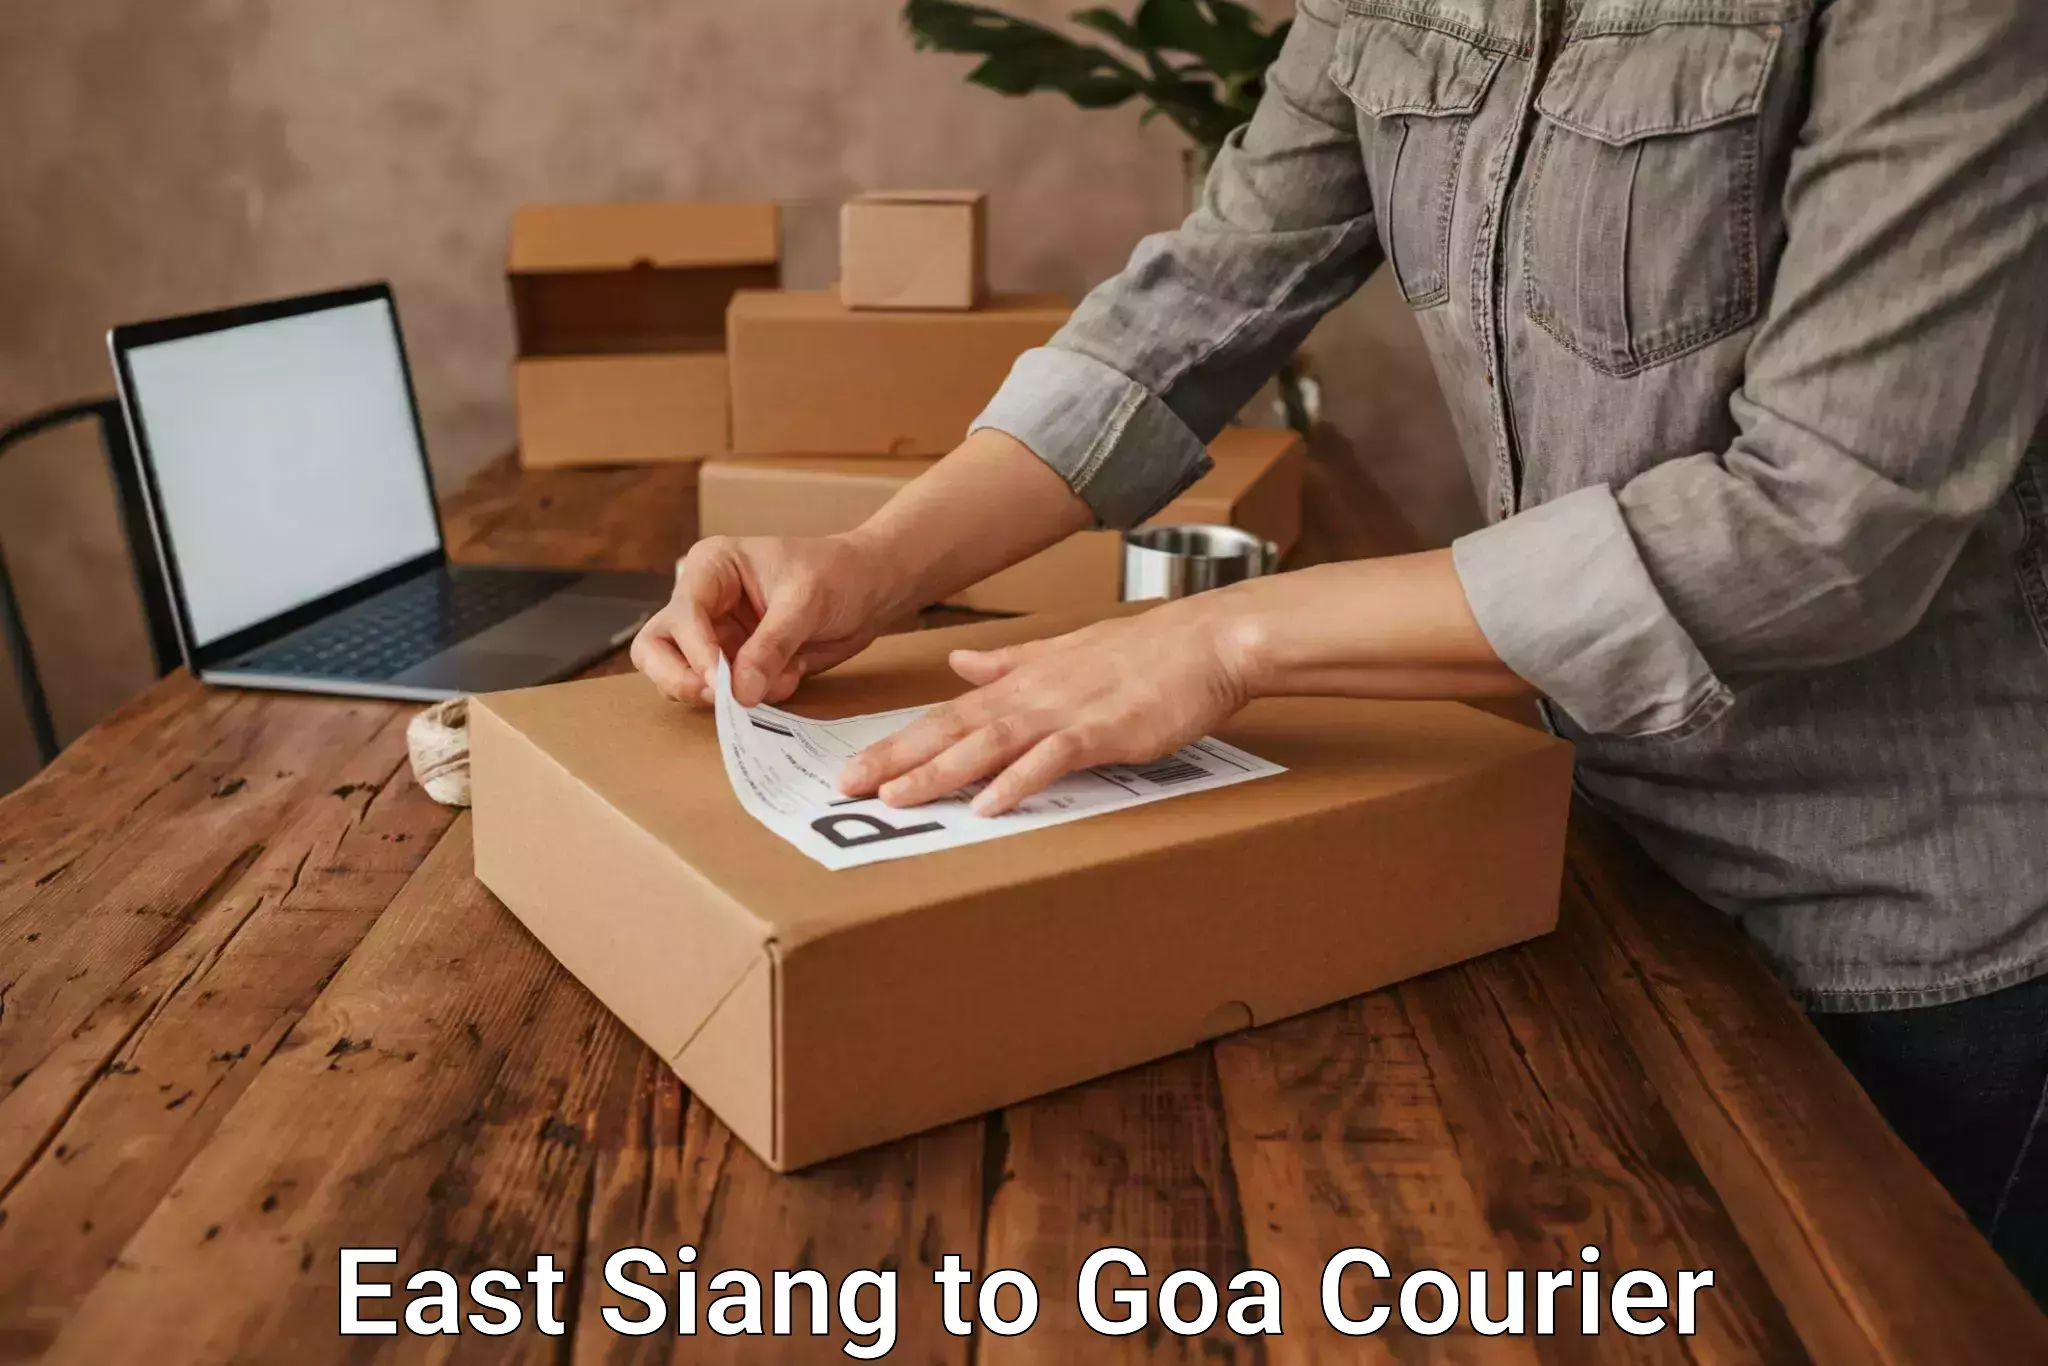 Business delivery service East Siang to Goa